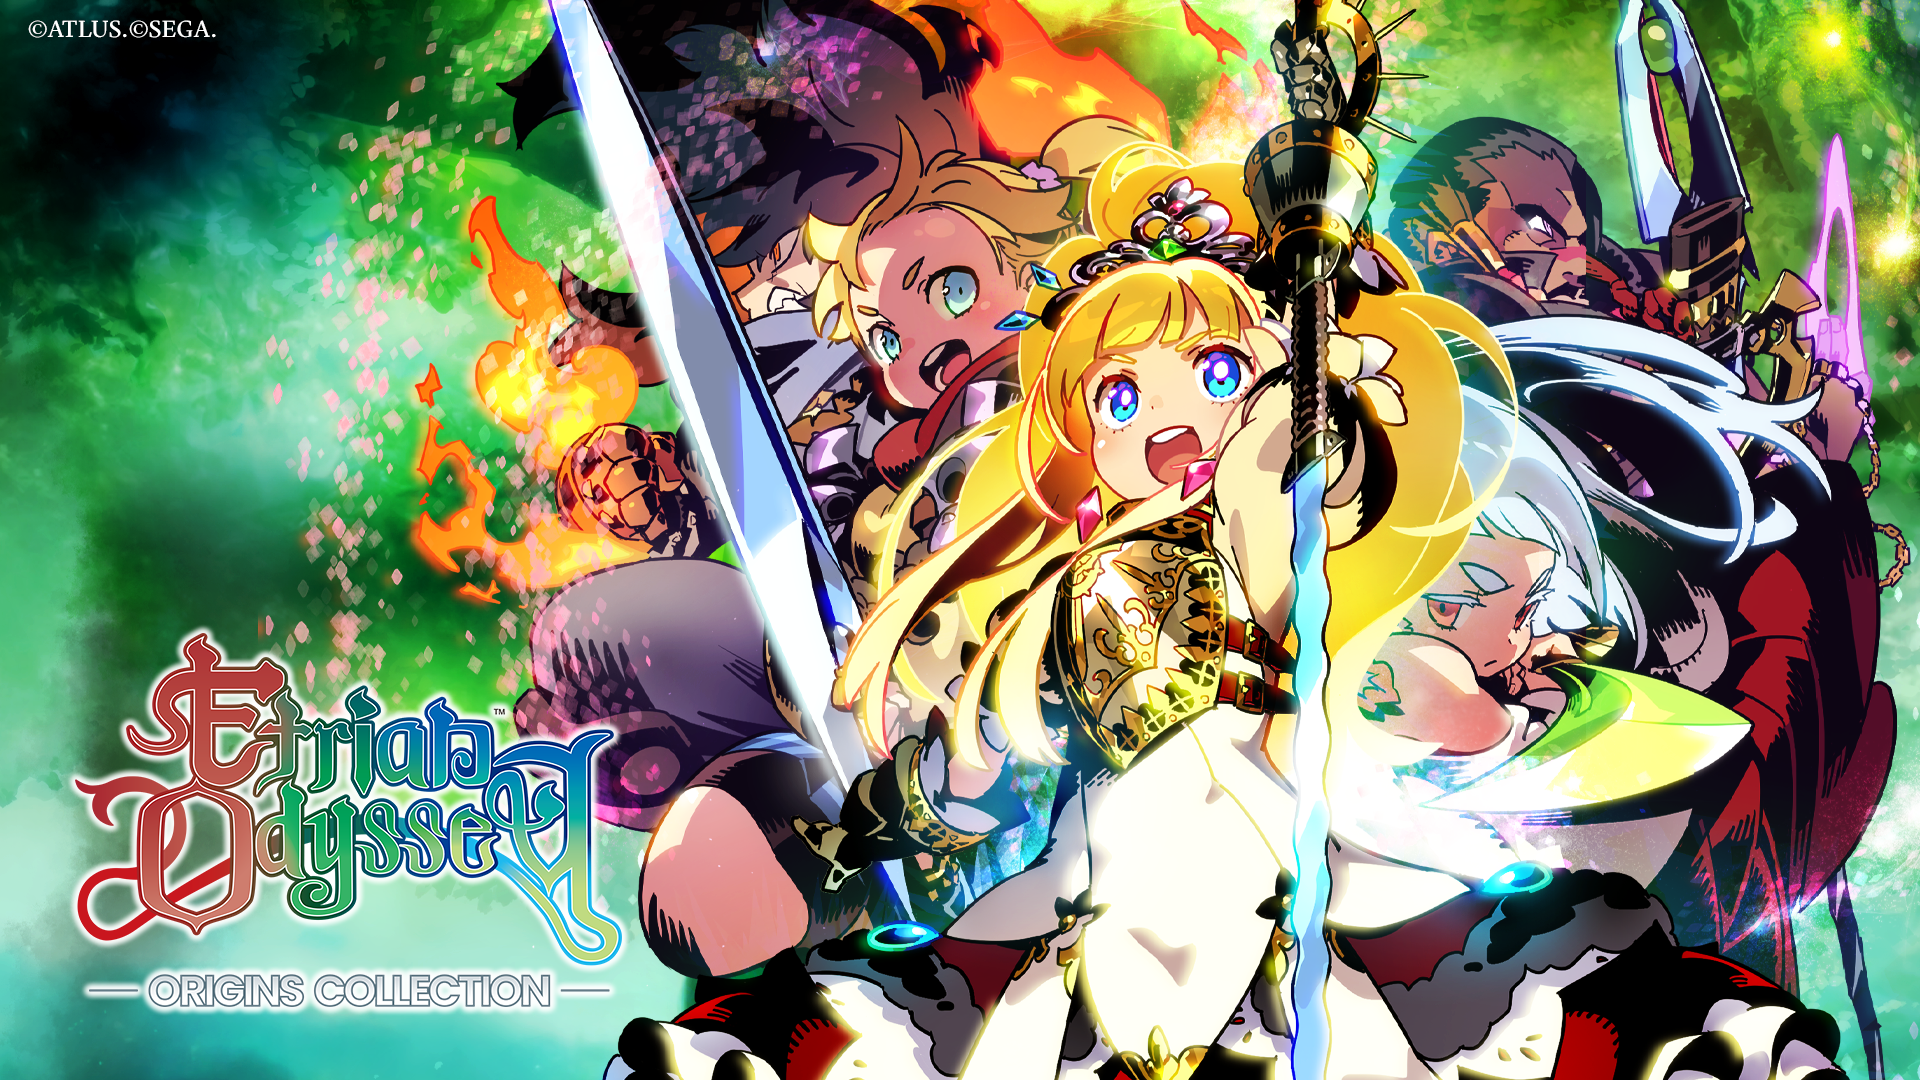 Crunchyroll: Etrian Odyssey Origins Collection Wallpaper and Avatars Arrive to Prepare You For Adventure